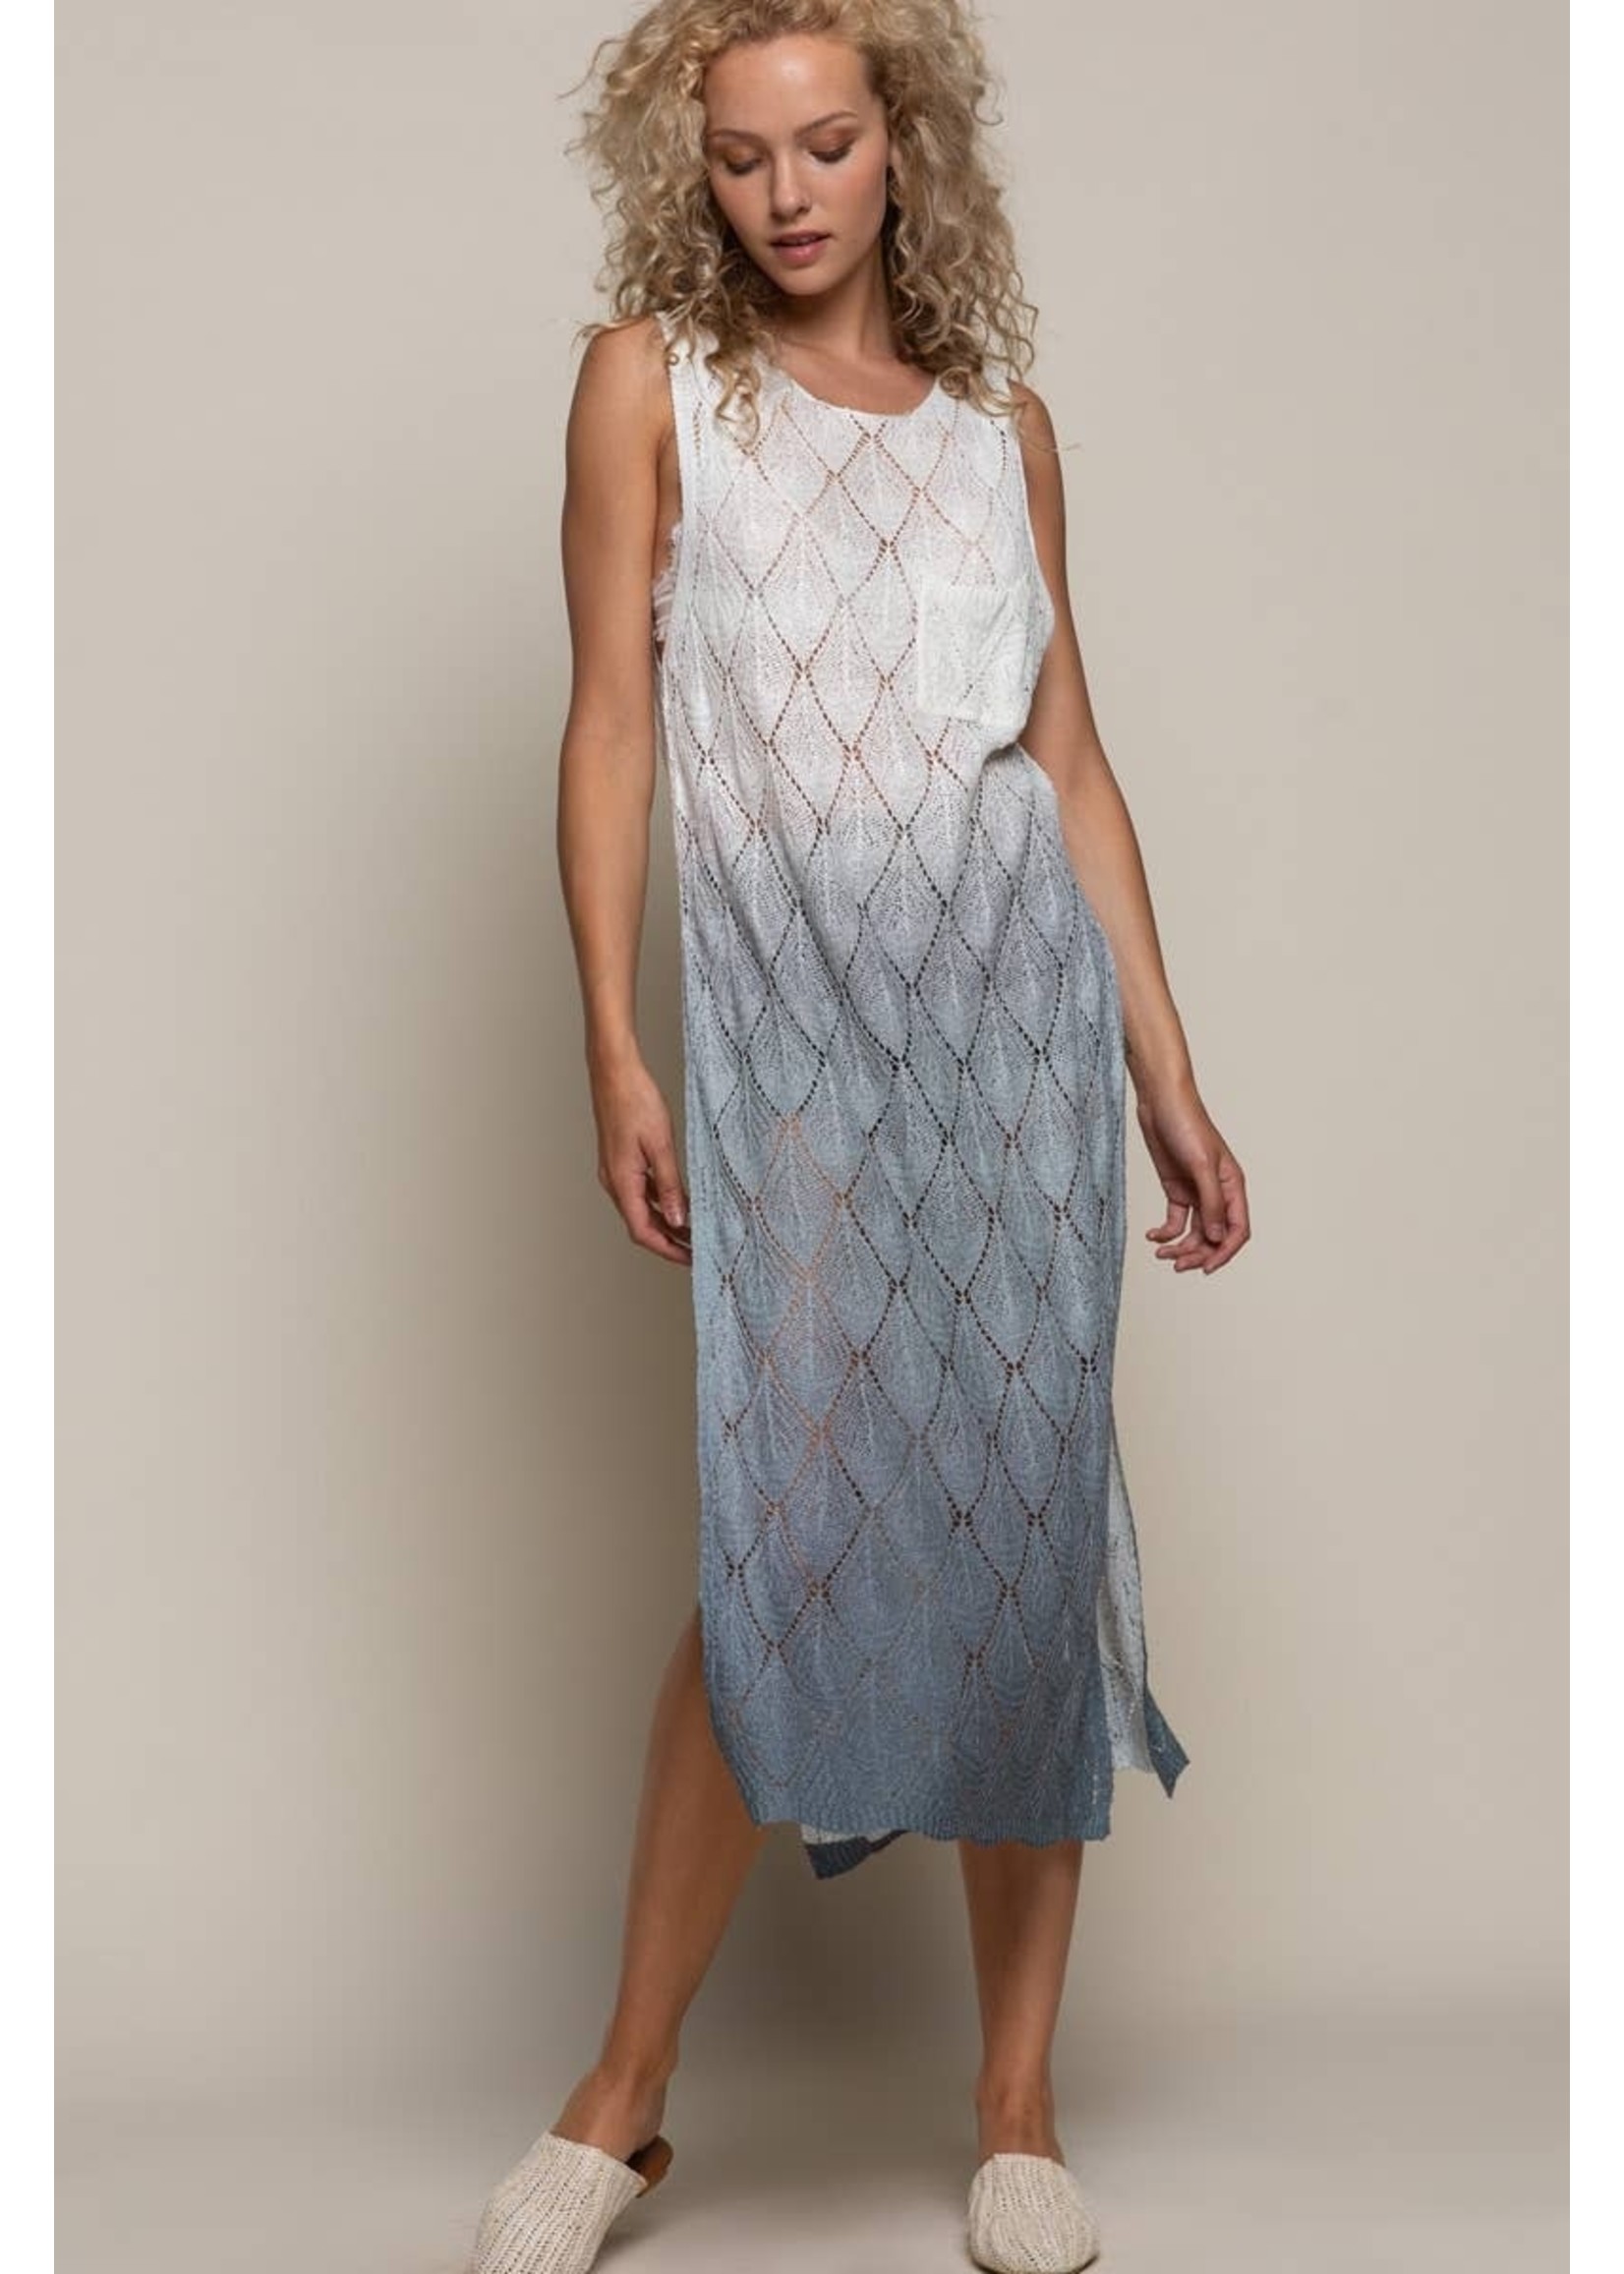 Lace Beach Cover Up